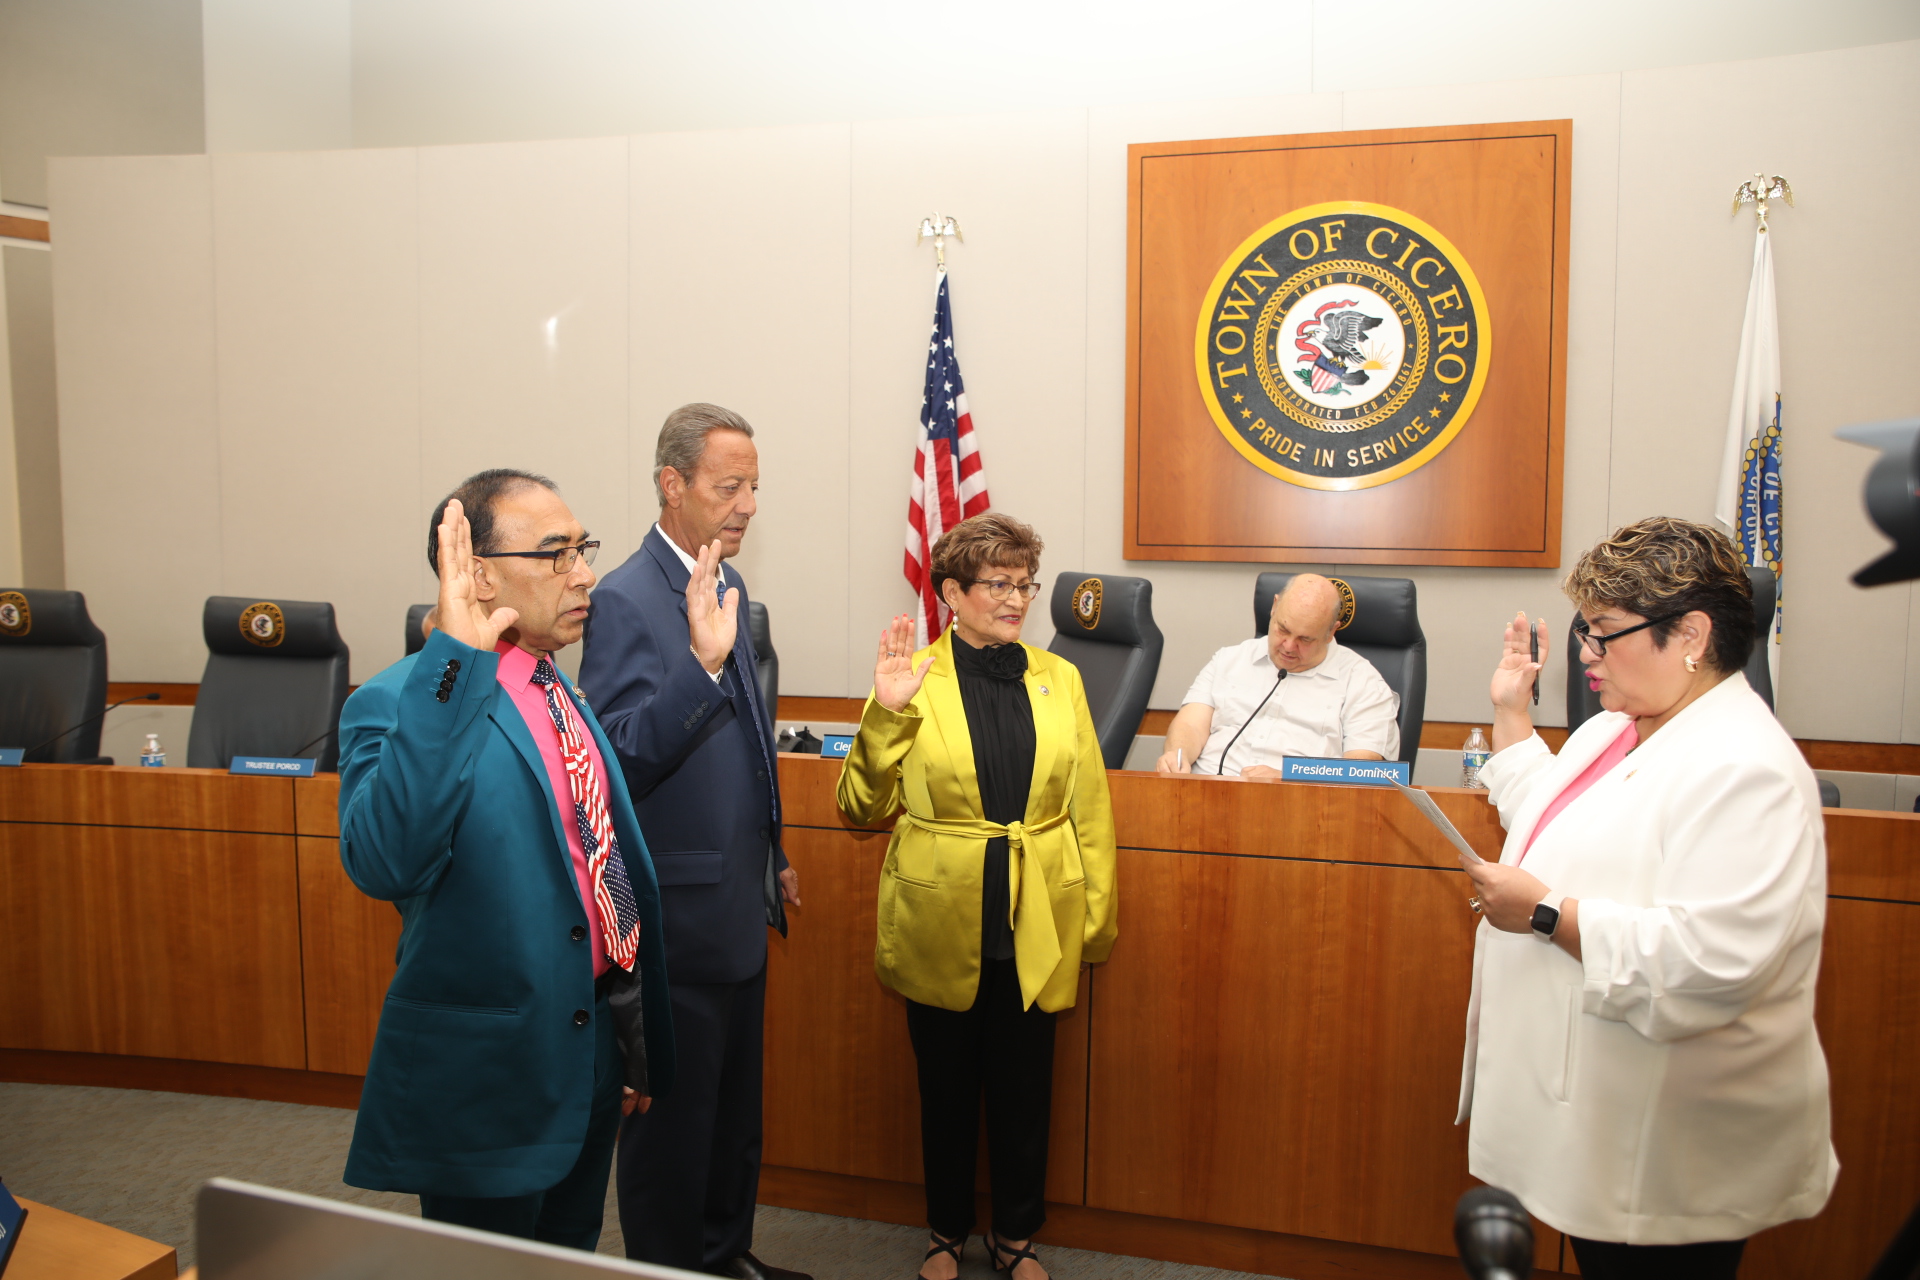 Town Clerk Maria Punzo-Arias administers the Oath of Office to Trustees Victor Garcia, John Cava and Blanca Vargas at the board meeting on May 9, 2023